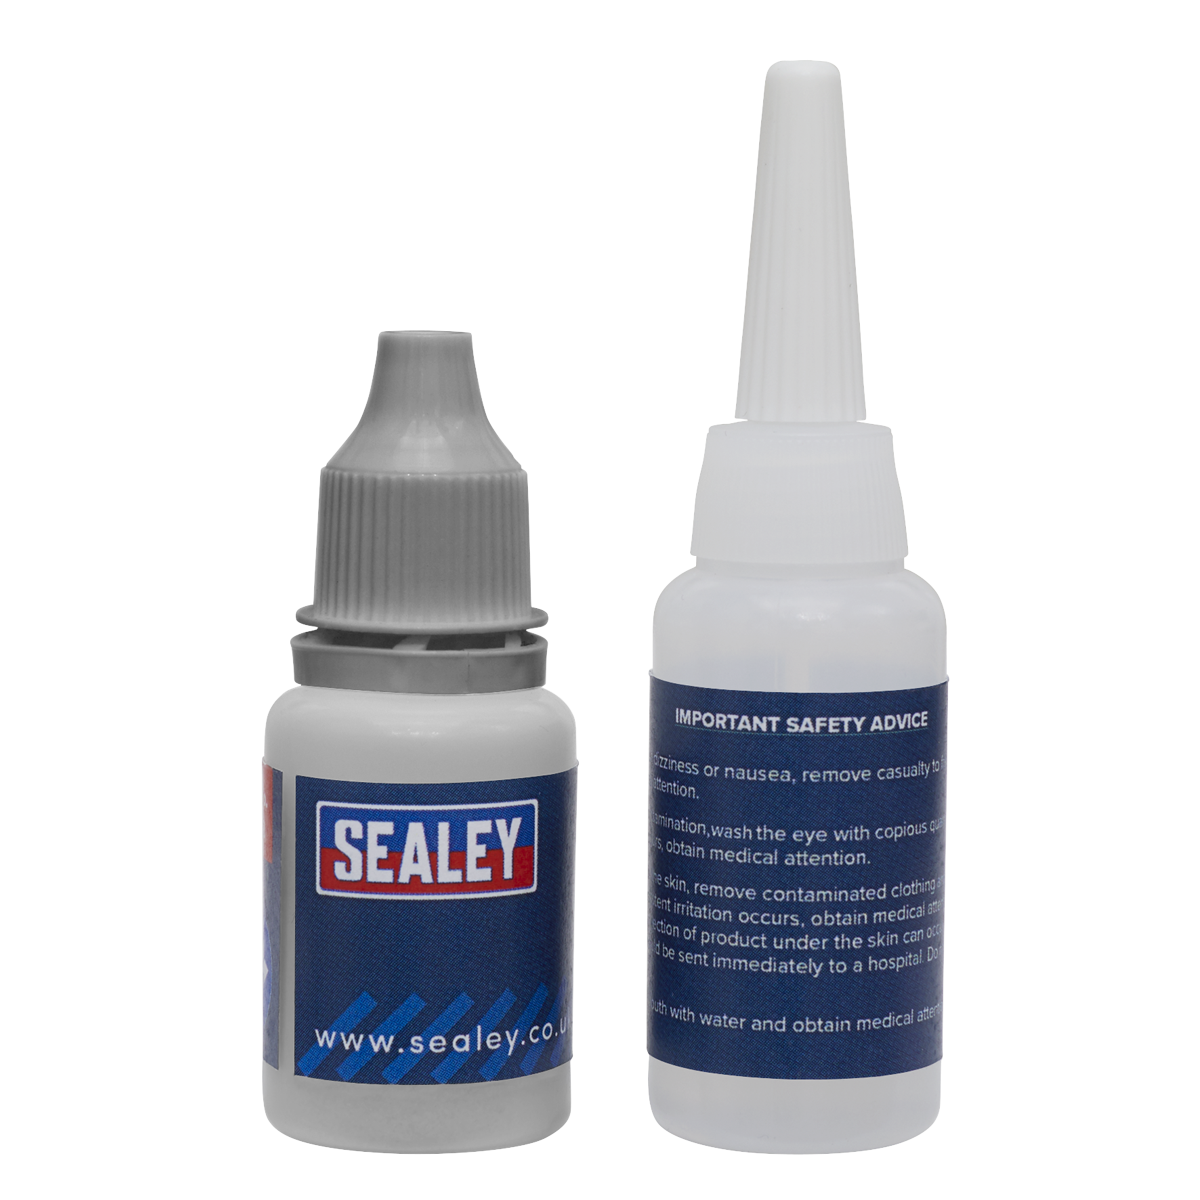 Sealey Fast-Fix Filler & Adhesive - Grey